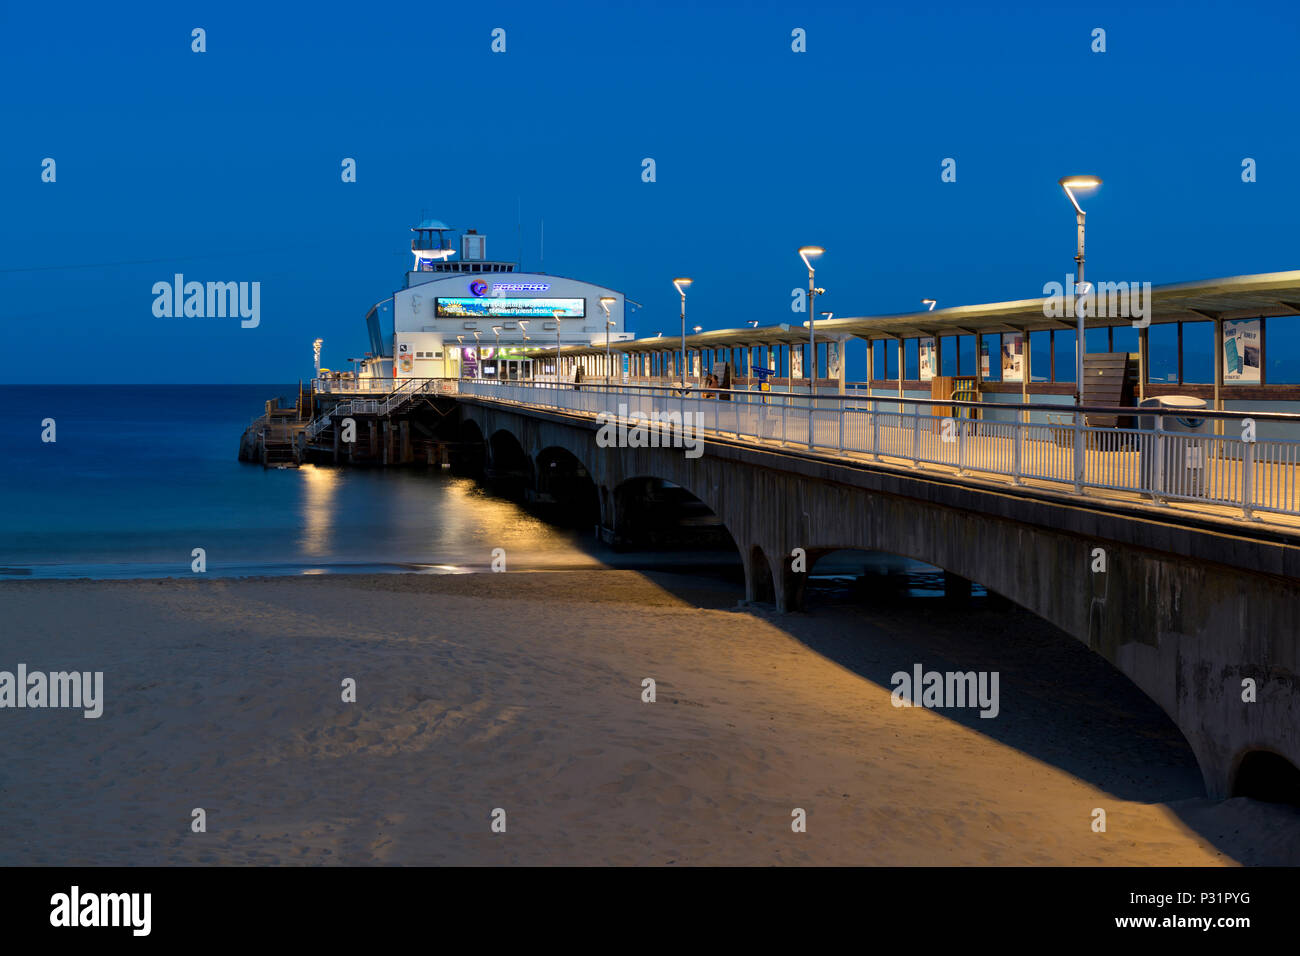 Bournemouth pier at night with a clear blue sky Stock Photo